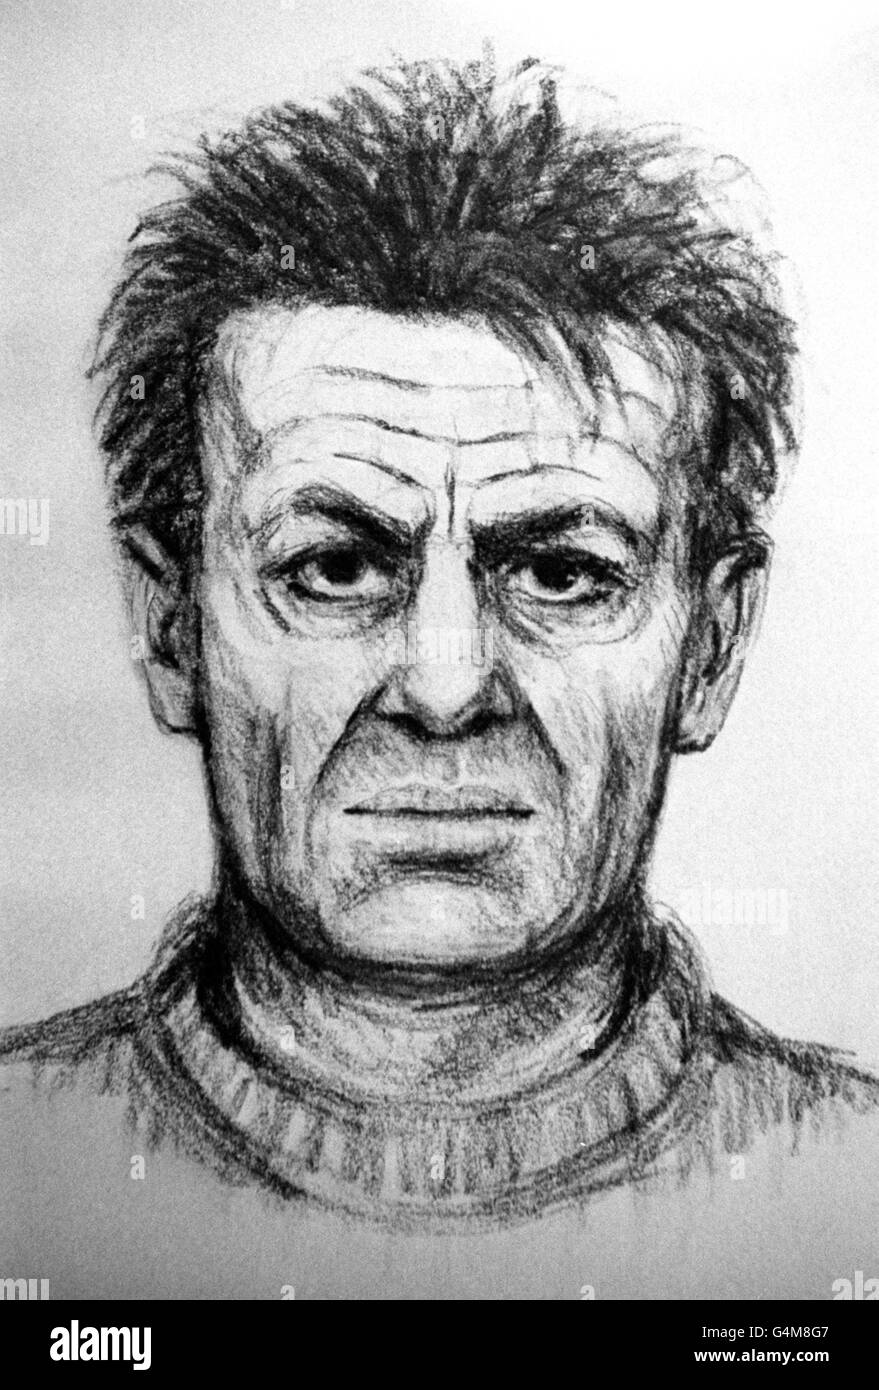 PA News Photo 7/2/92 A new artist's impression of the man who kidnapped Stephanie Slater, issued by the police. * Michael Sams. Stock Photo